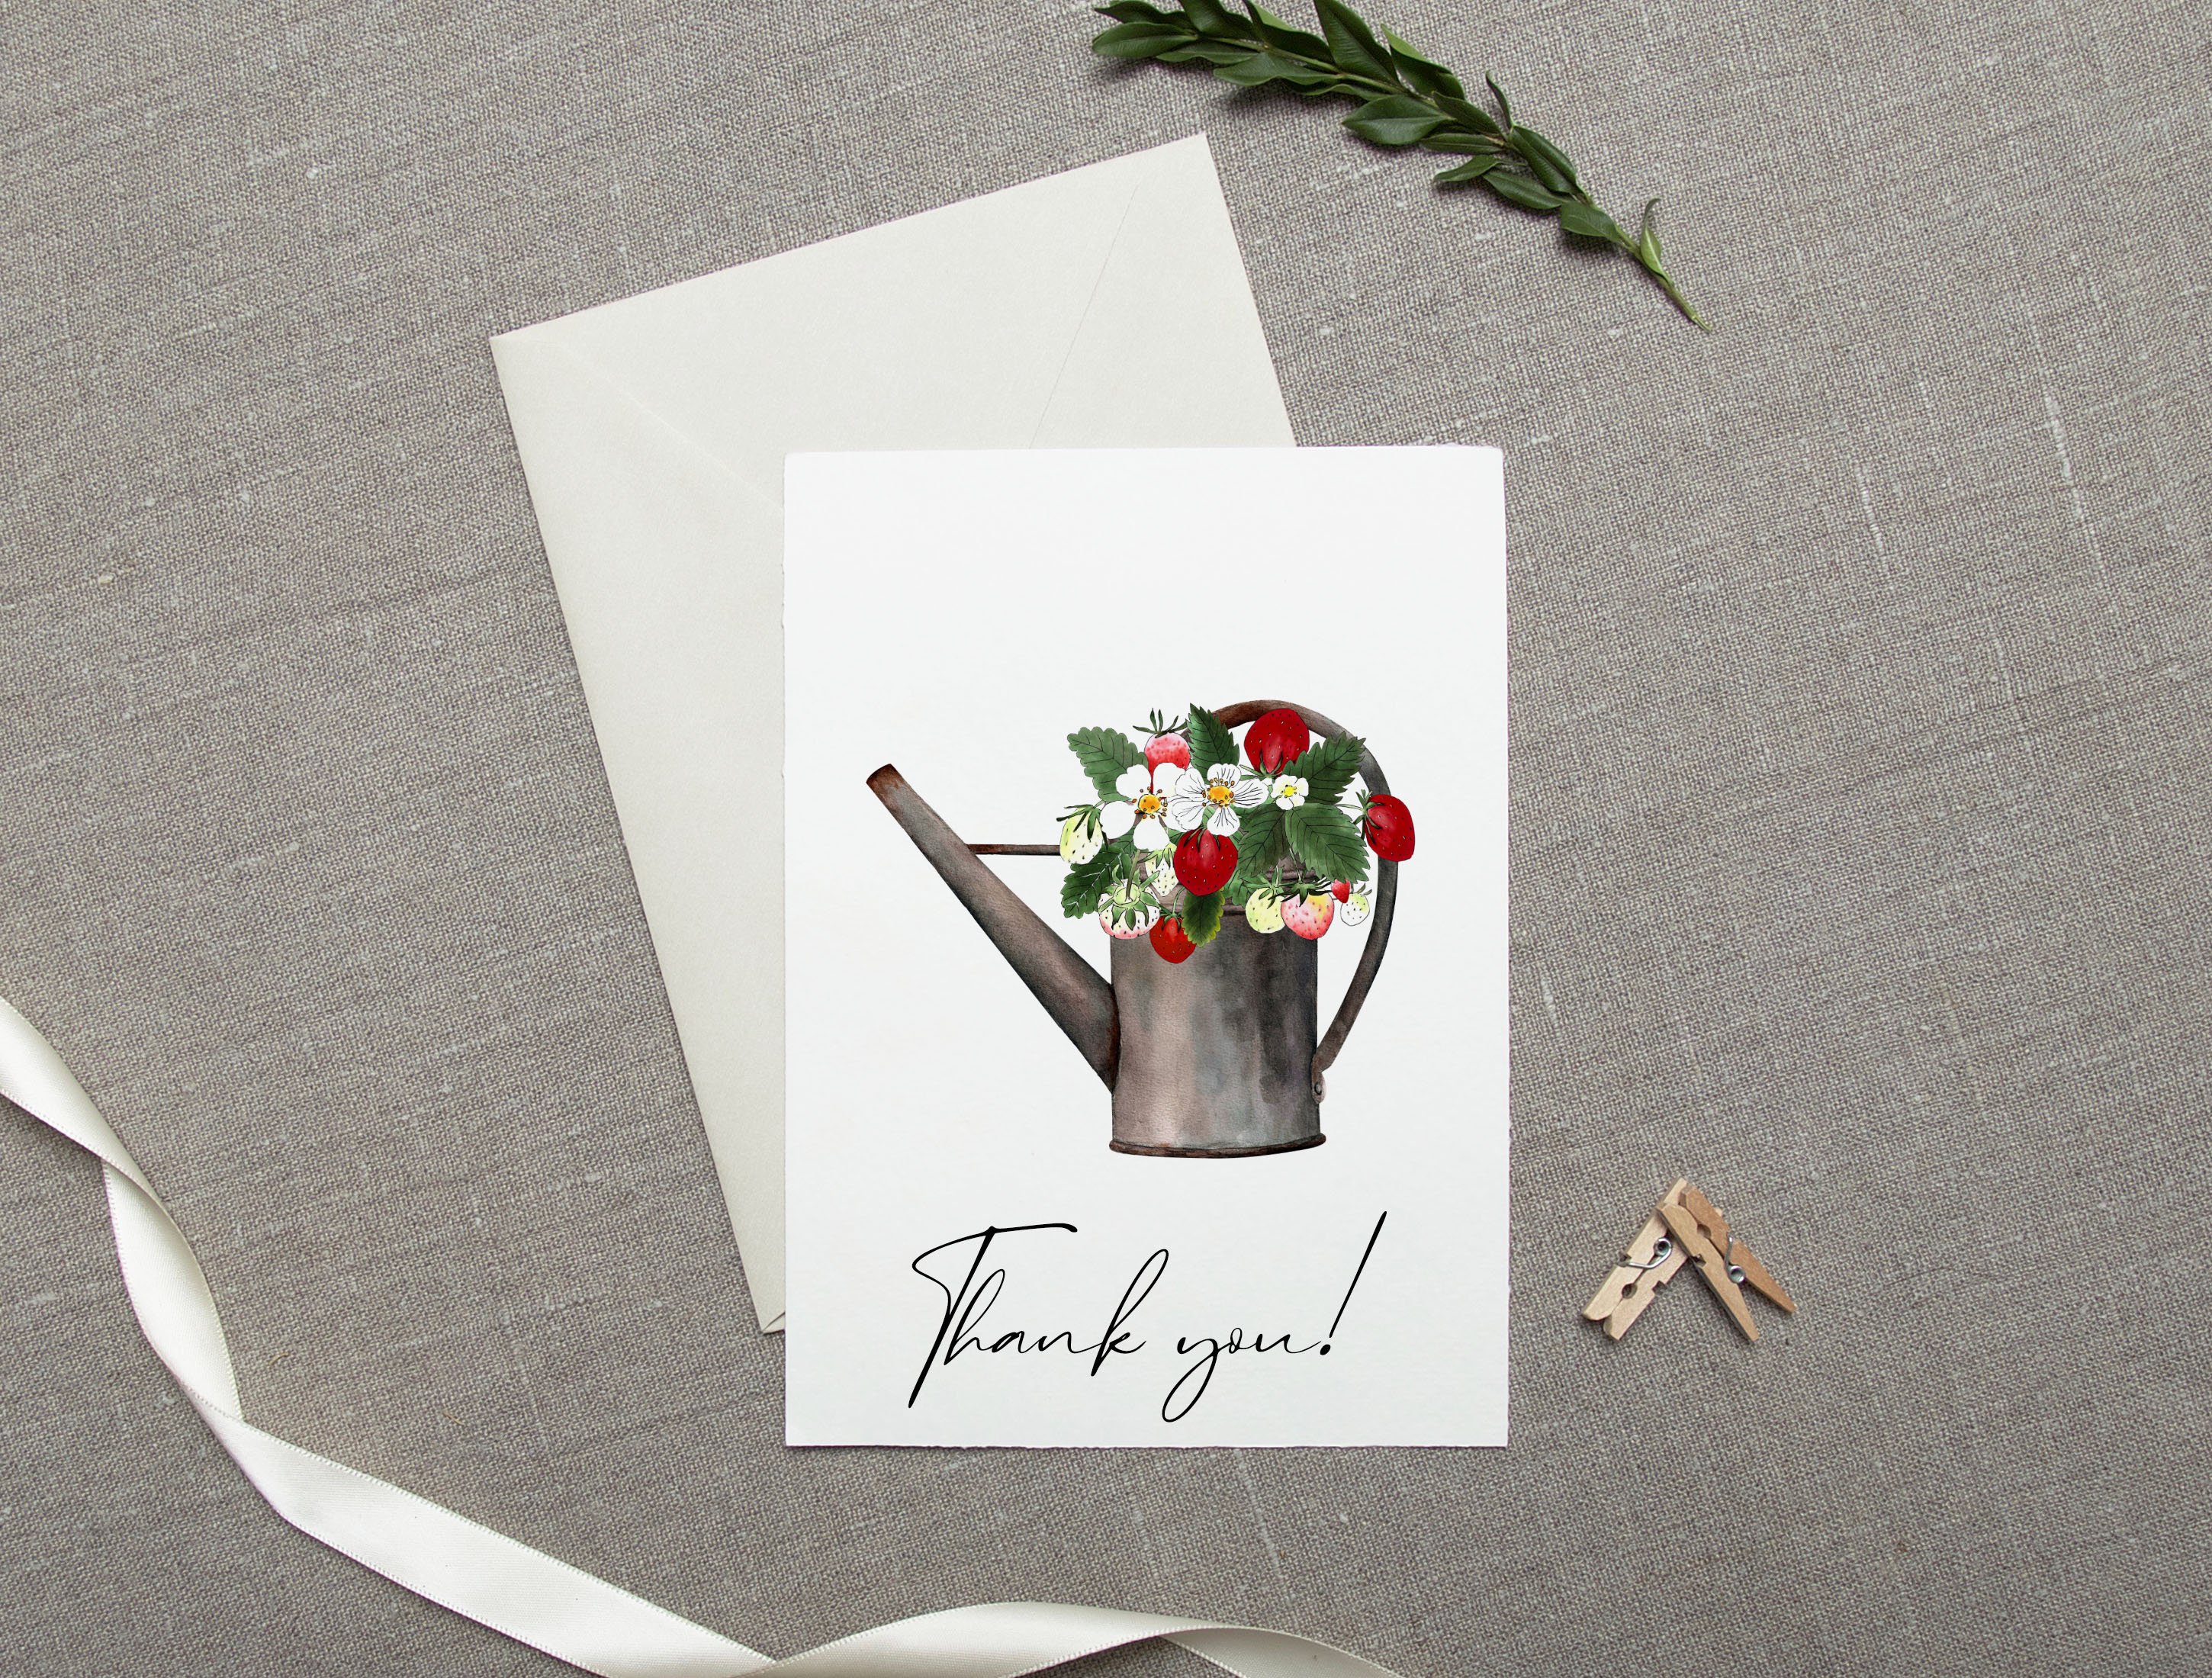 White greeting card with black lettering "Thank you!" and illustration of a strawberry in watering can.